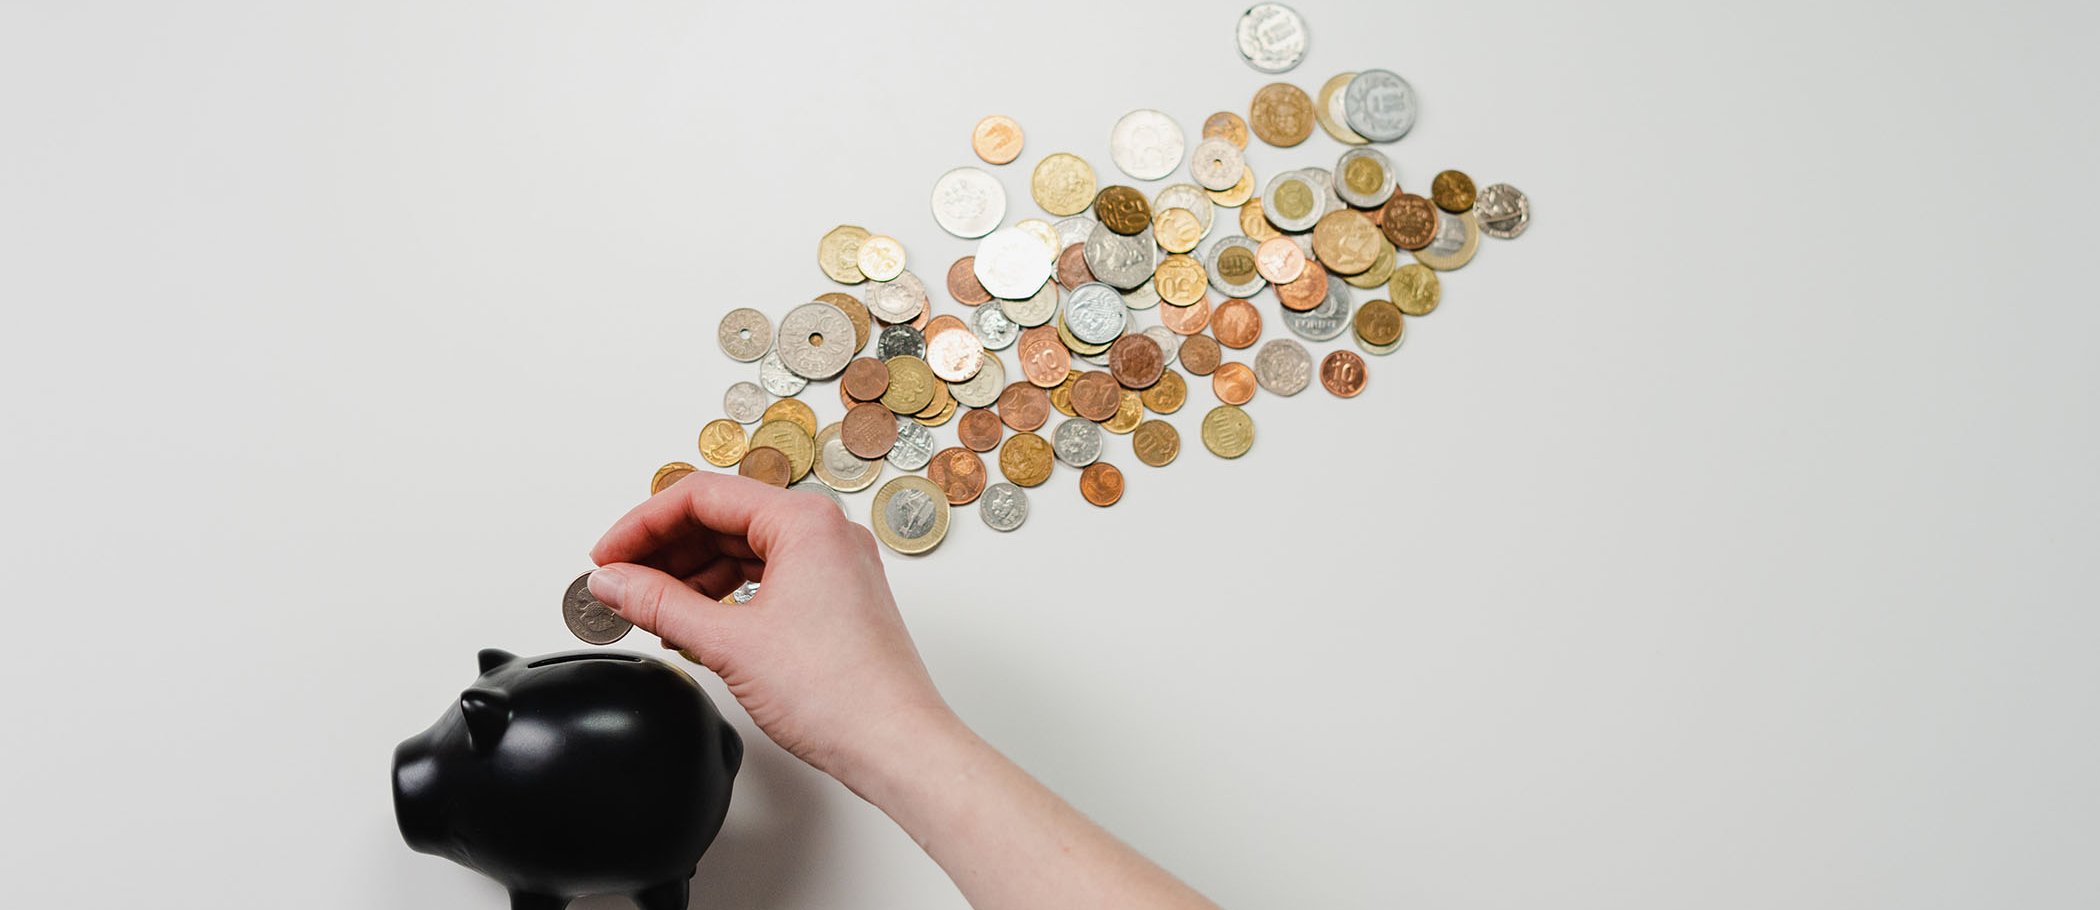 A person putting a coin in a piggy bank, with more coins on the table